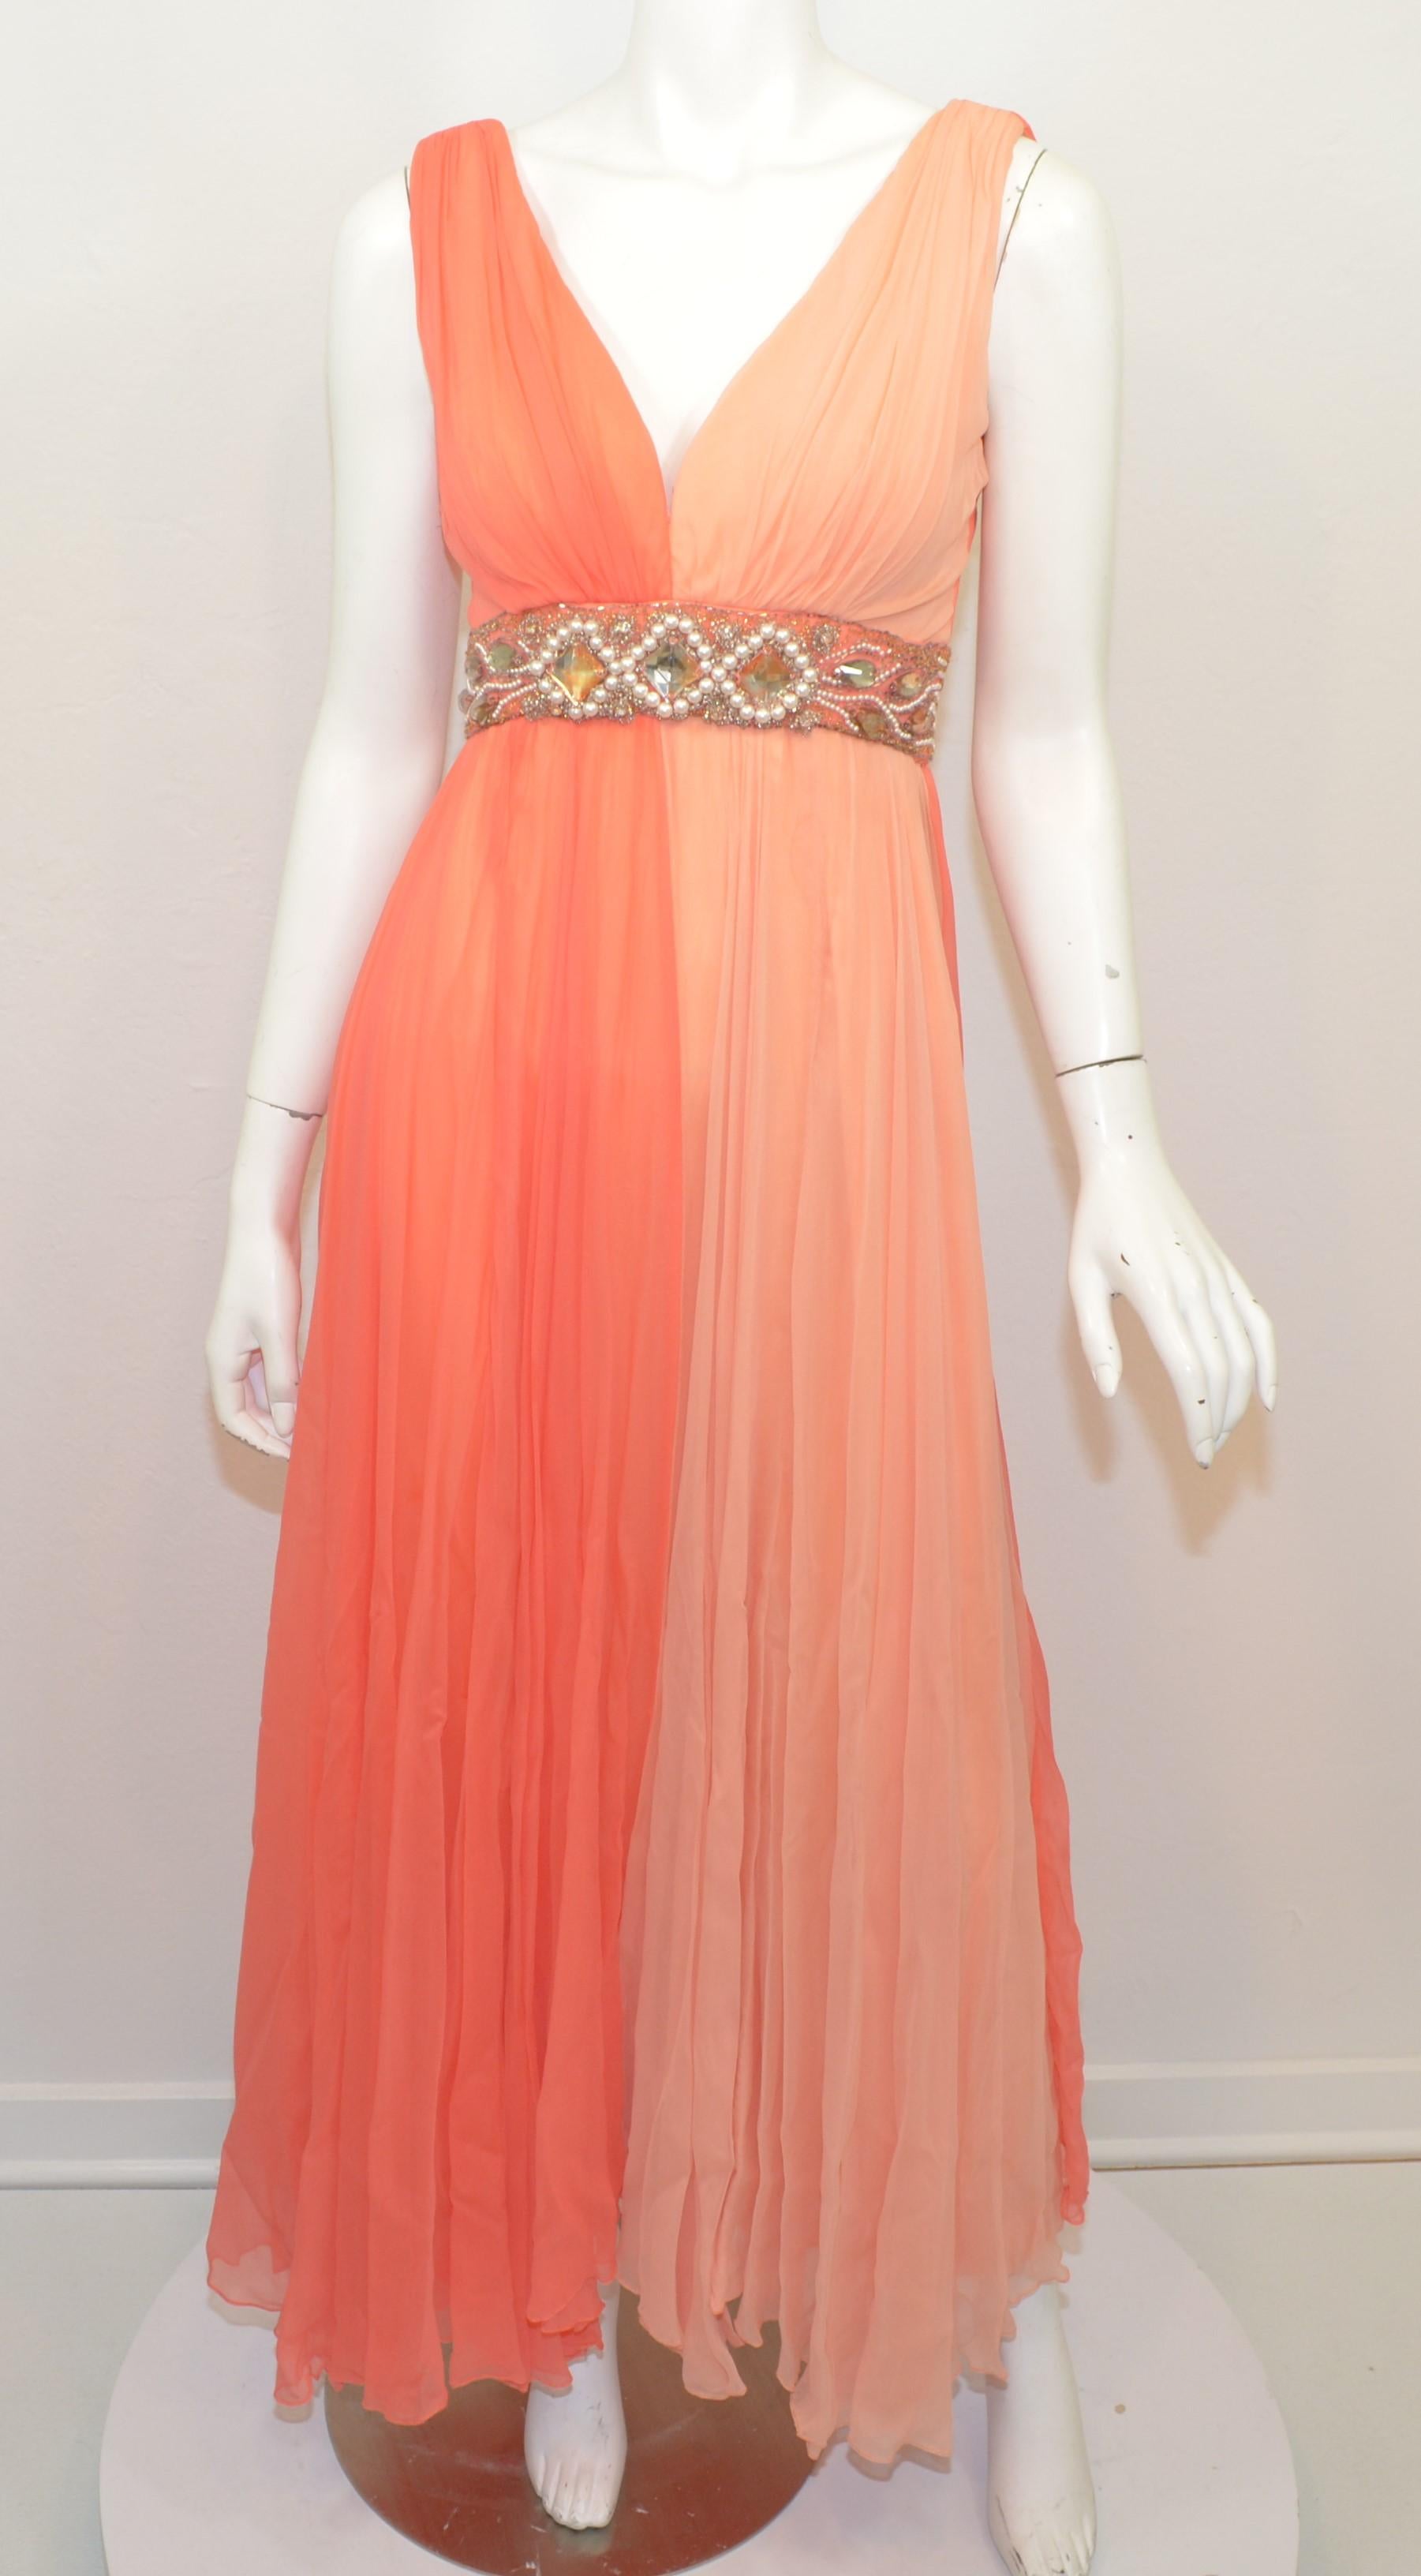 1950's Vintage Judd’s Coral Dress with Bead Embellishing -- Coral-colored chiffon gown features a beaded waist band, v-neckline leading through the back with a zipper fastening. Dress is full lined and is in excellent vintage